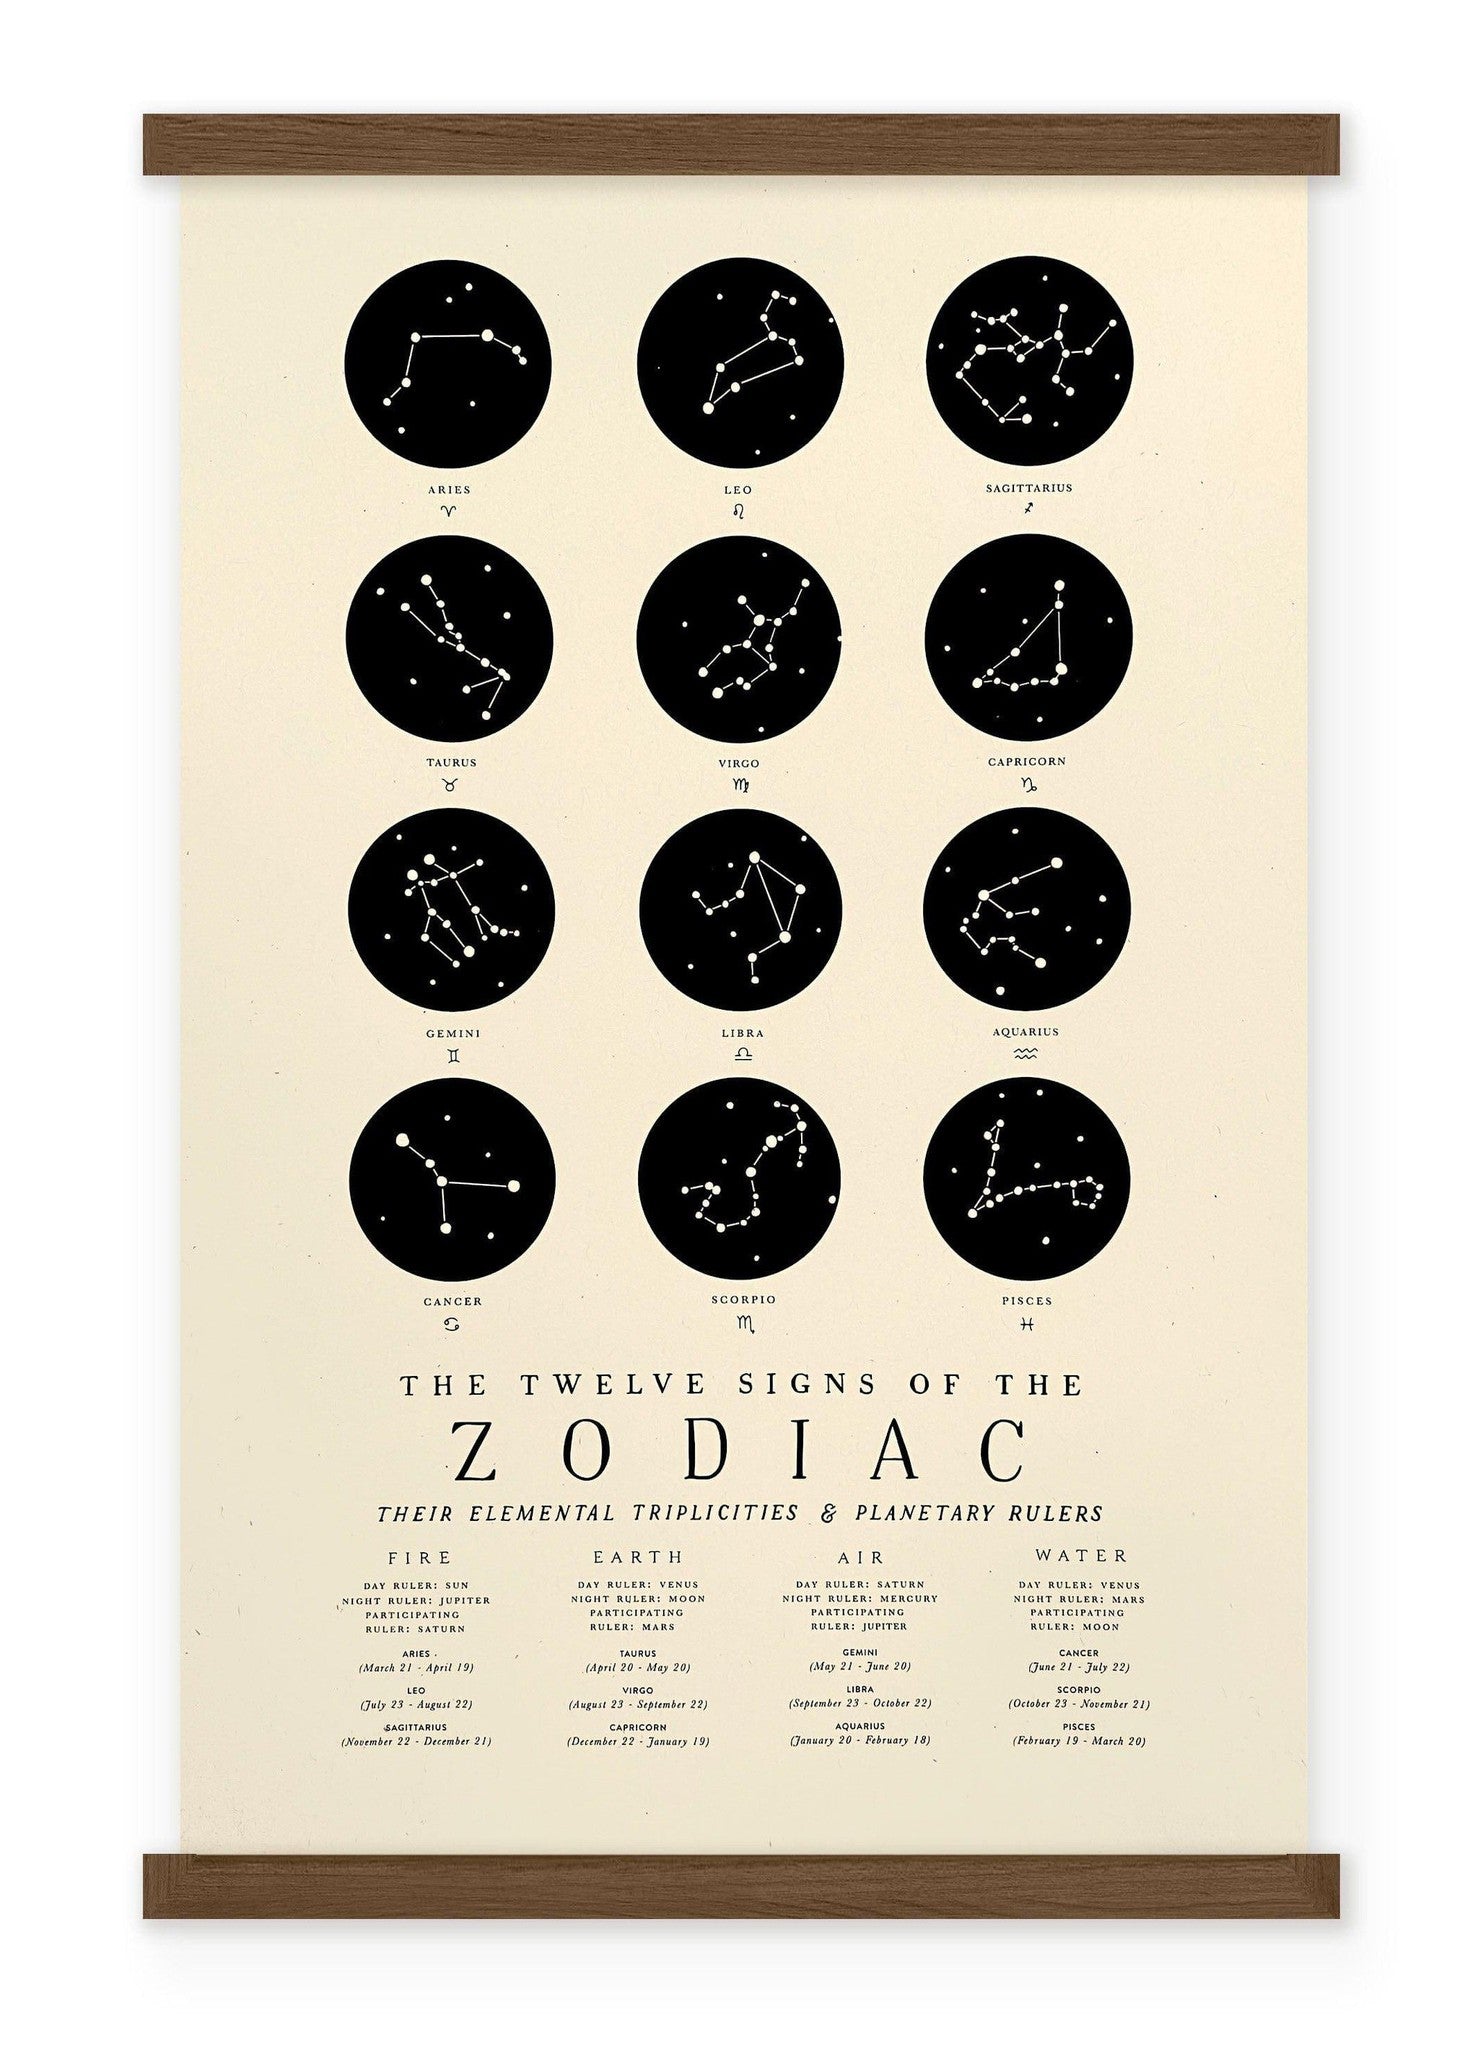 The Zodiac Constellations 11x17 print by The Wild Wander.